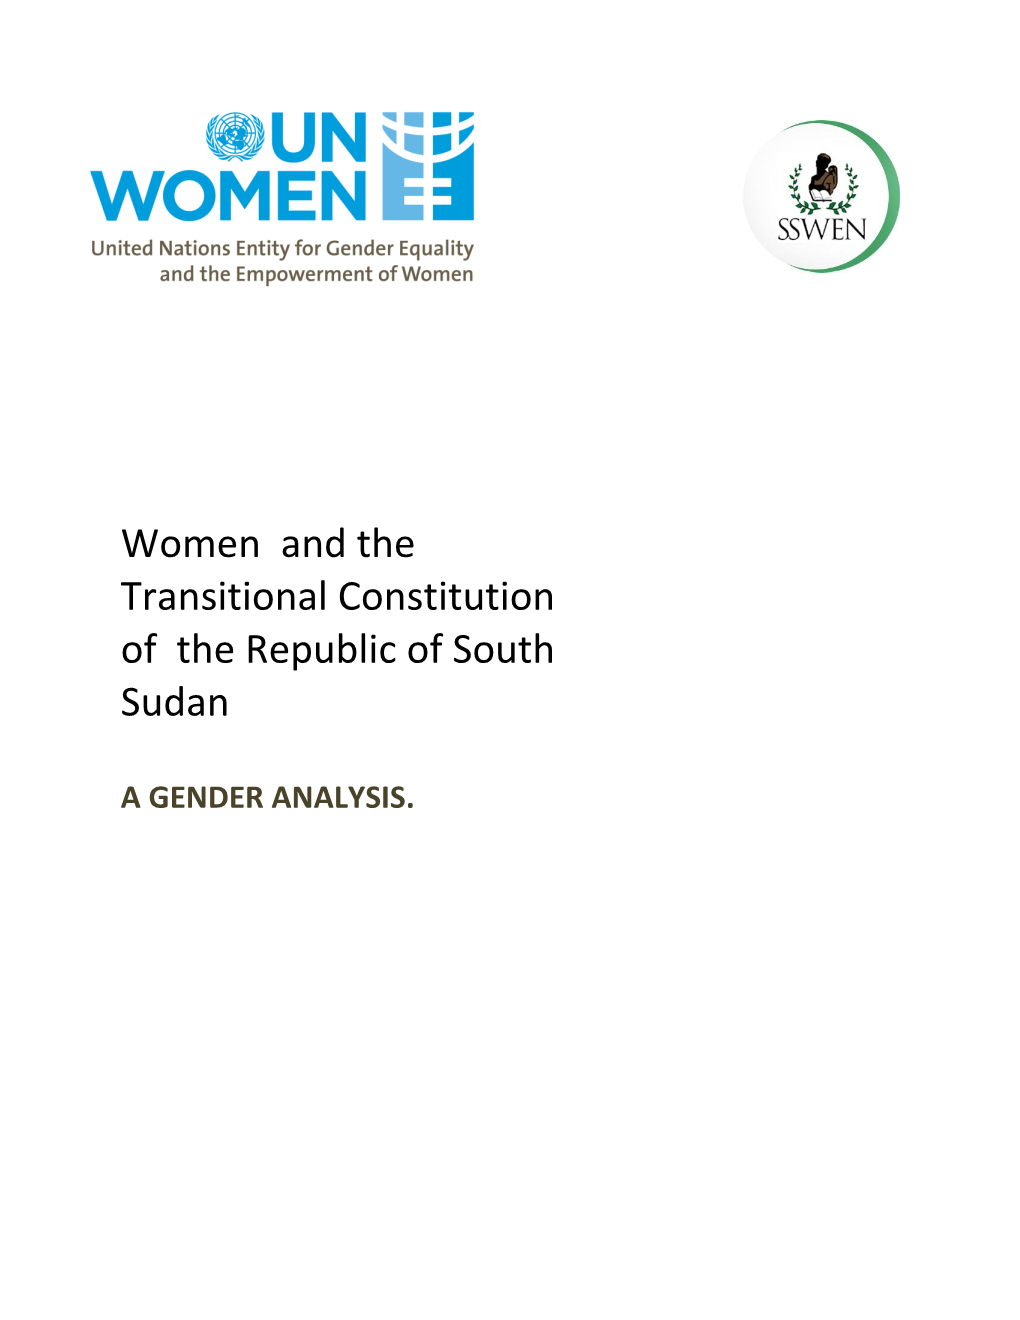 Women and the Transitional Constitution of the Republic of South Sudan